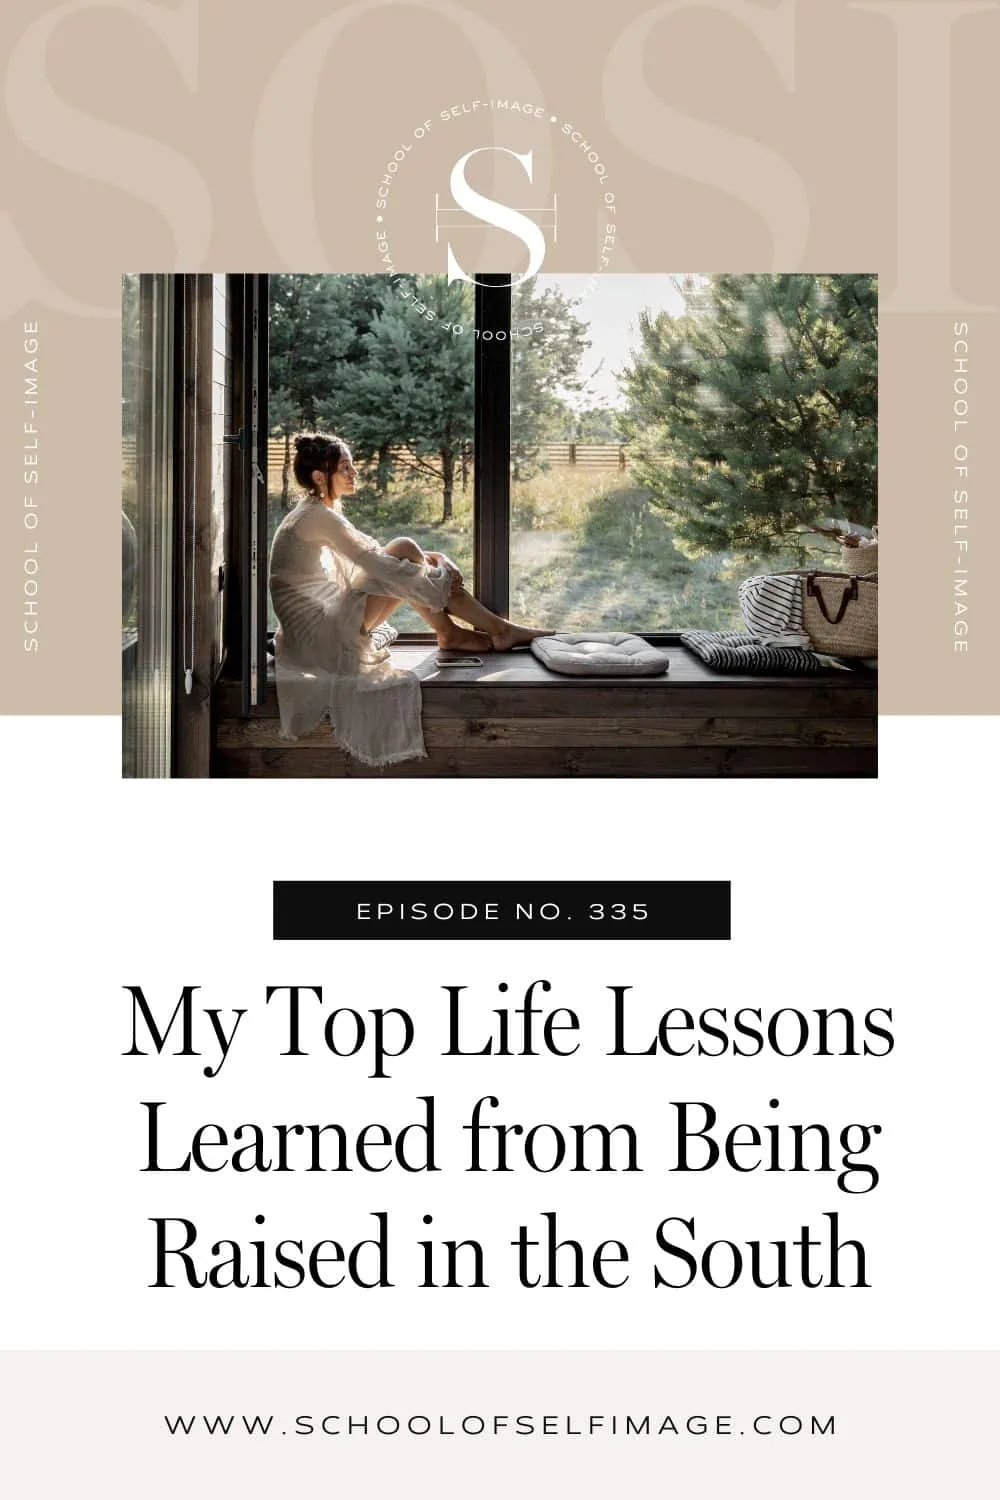 My Top Life Lessons from Being Raised in the South